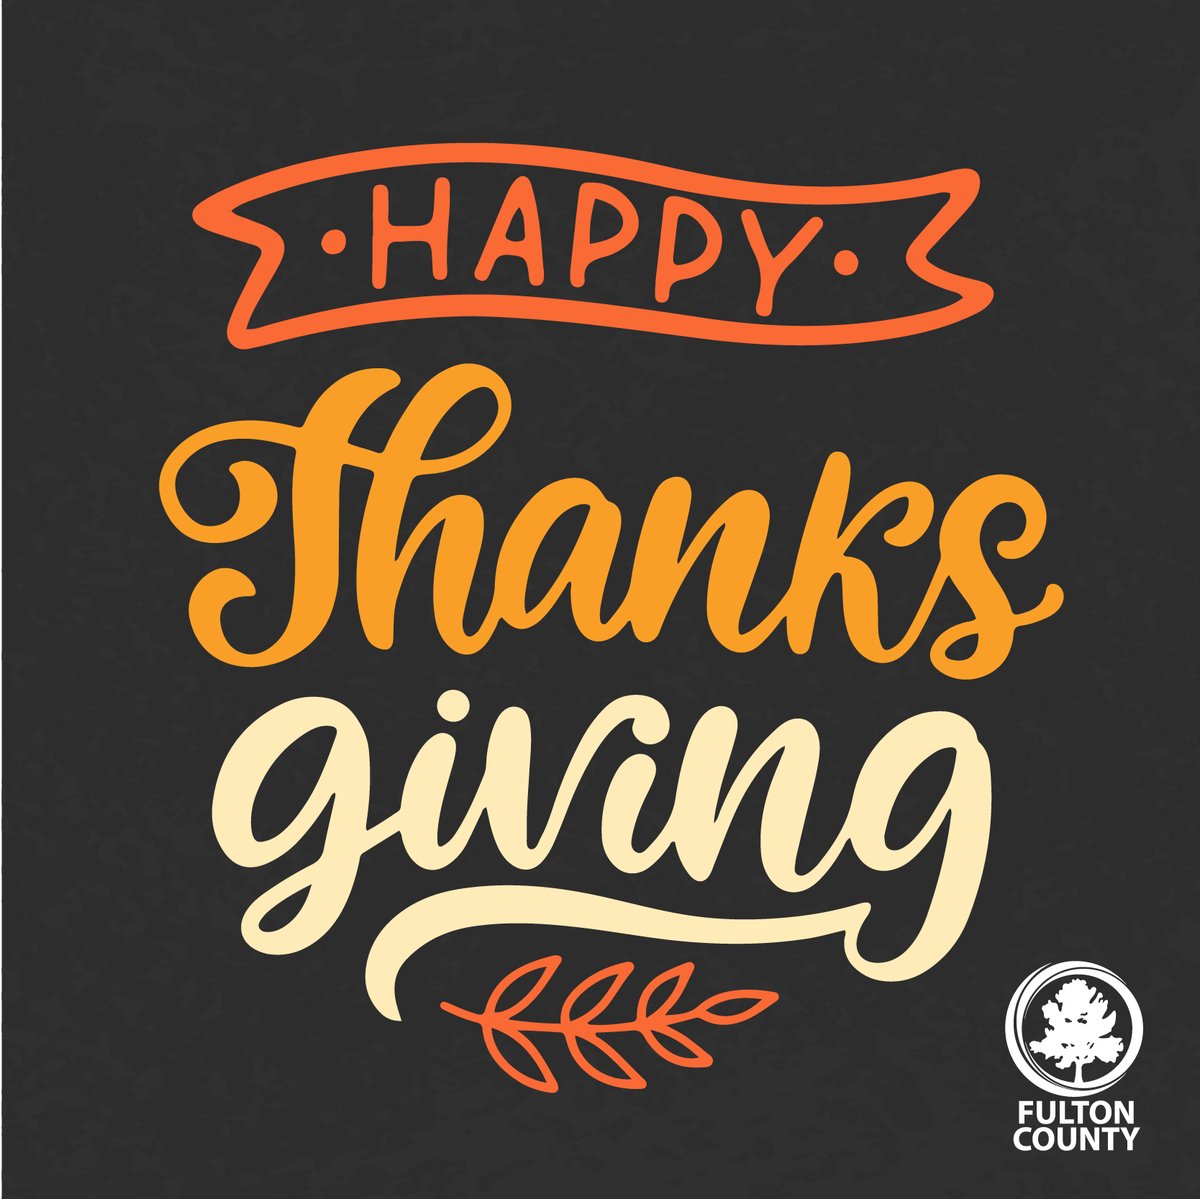 🍁🦃 Happy Thanksgiving Fulton County! 🦃🍁
Today, we want to express our heartfelt gratitude to our incredible #TeamFulton employees, amazing community service partners, and the wonderful Fulton County community!

#HappyThanksgiving #FultonInfo #Gratitude #CommunityImpact 🍂🥧